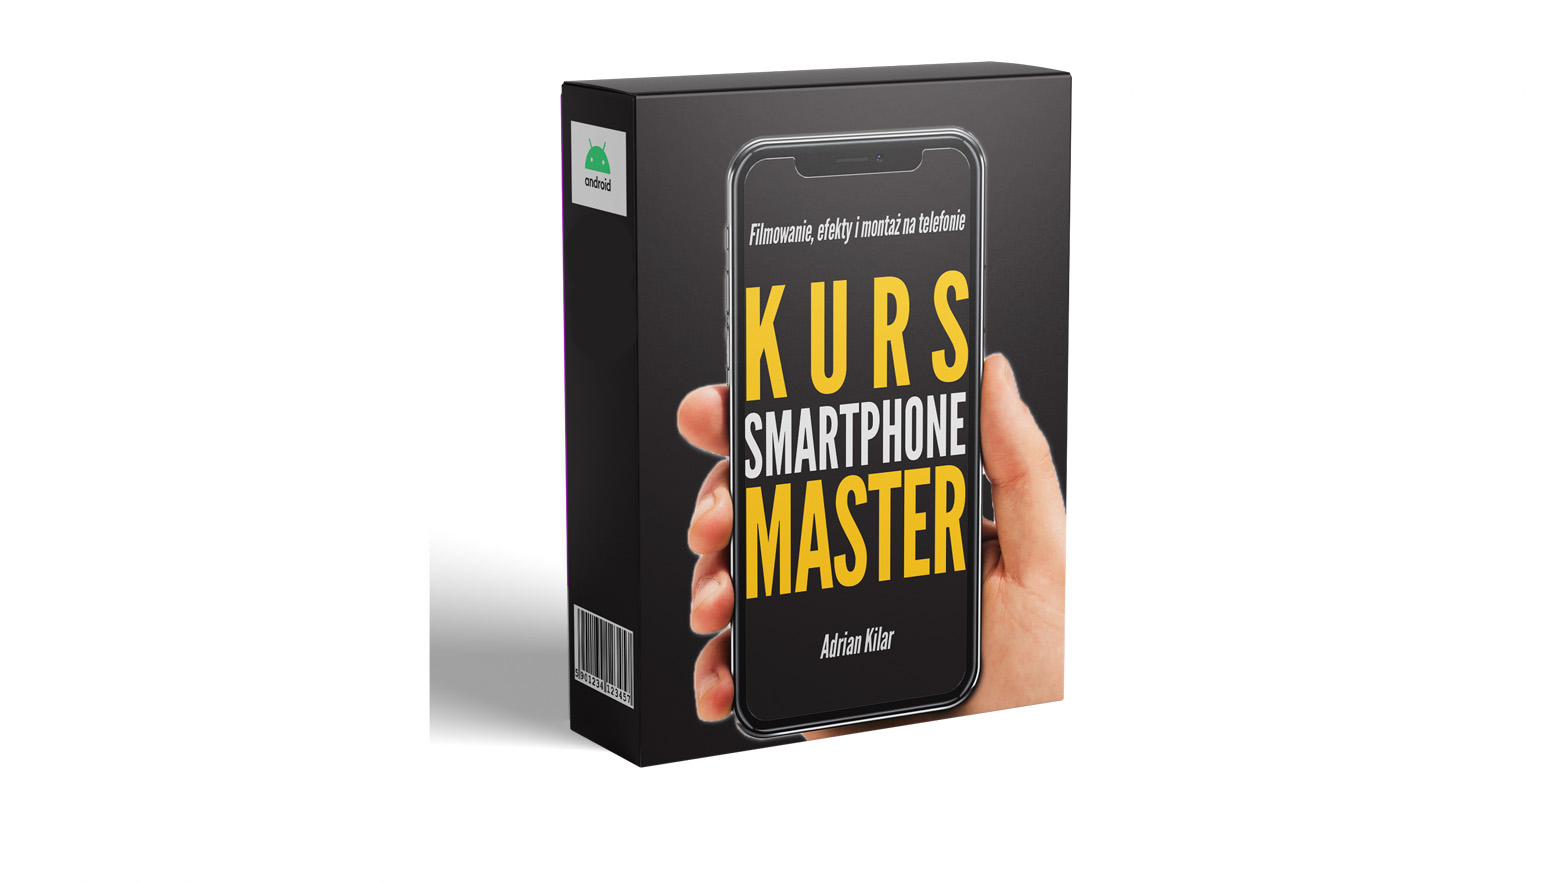 Kurs Smartphone Master [Android]